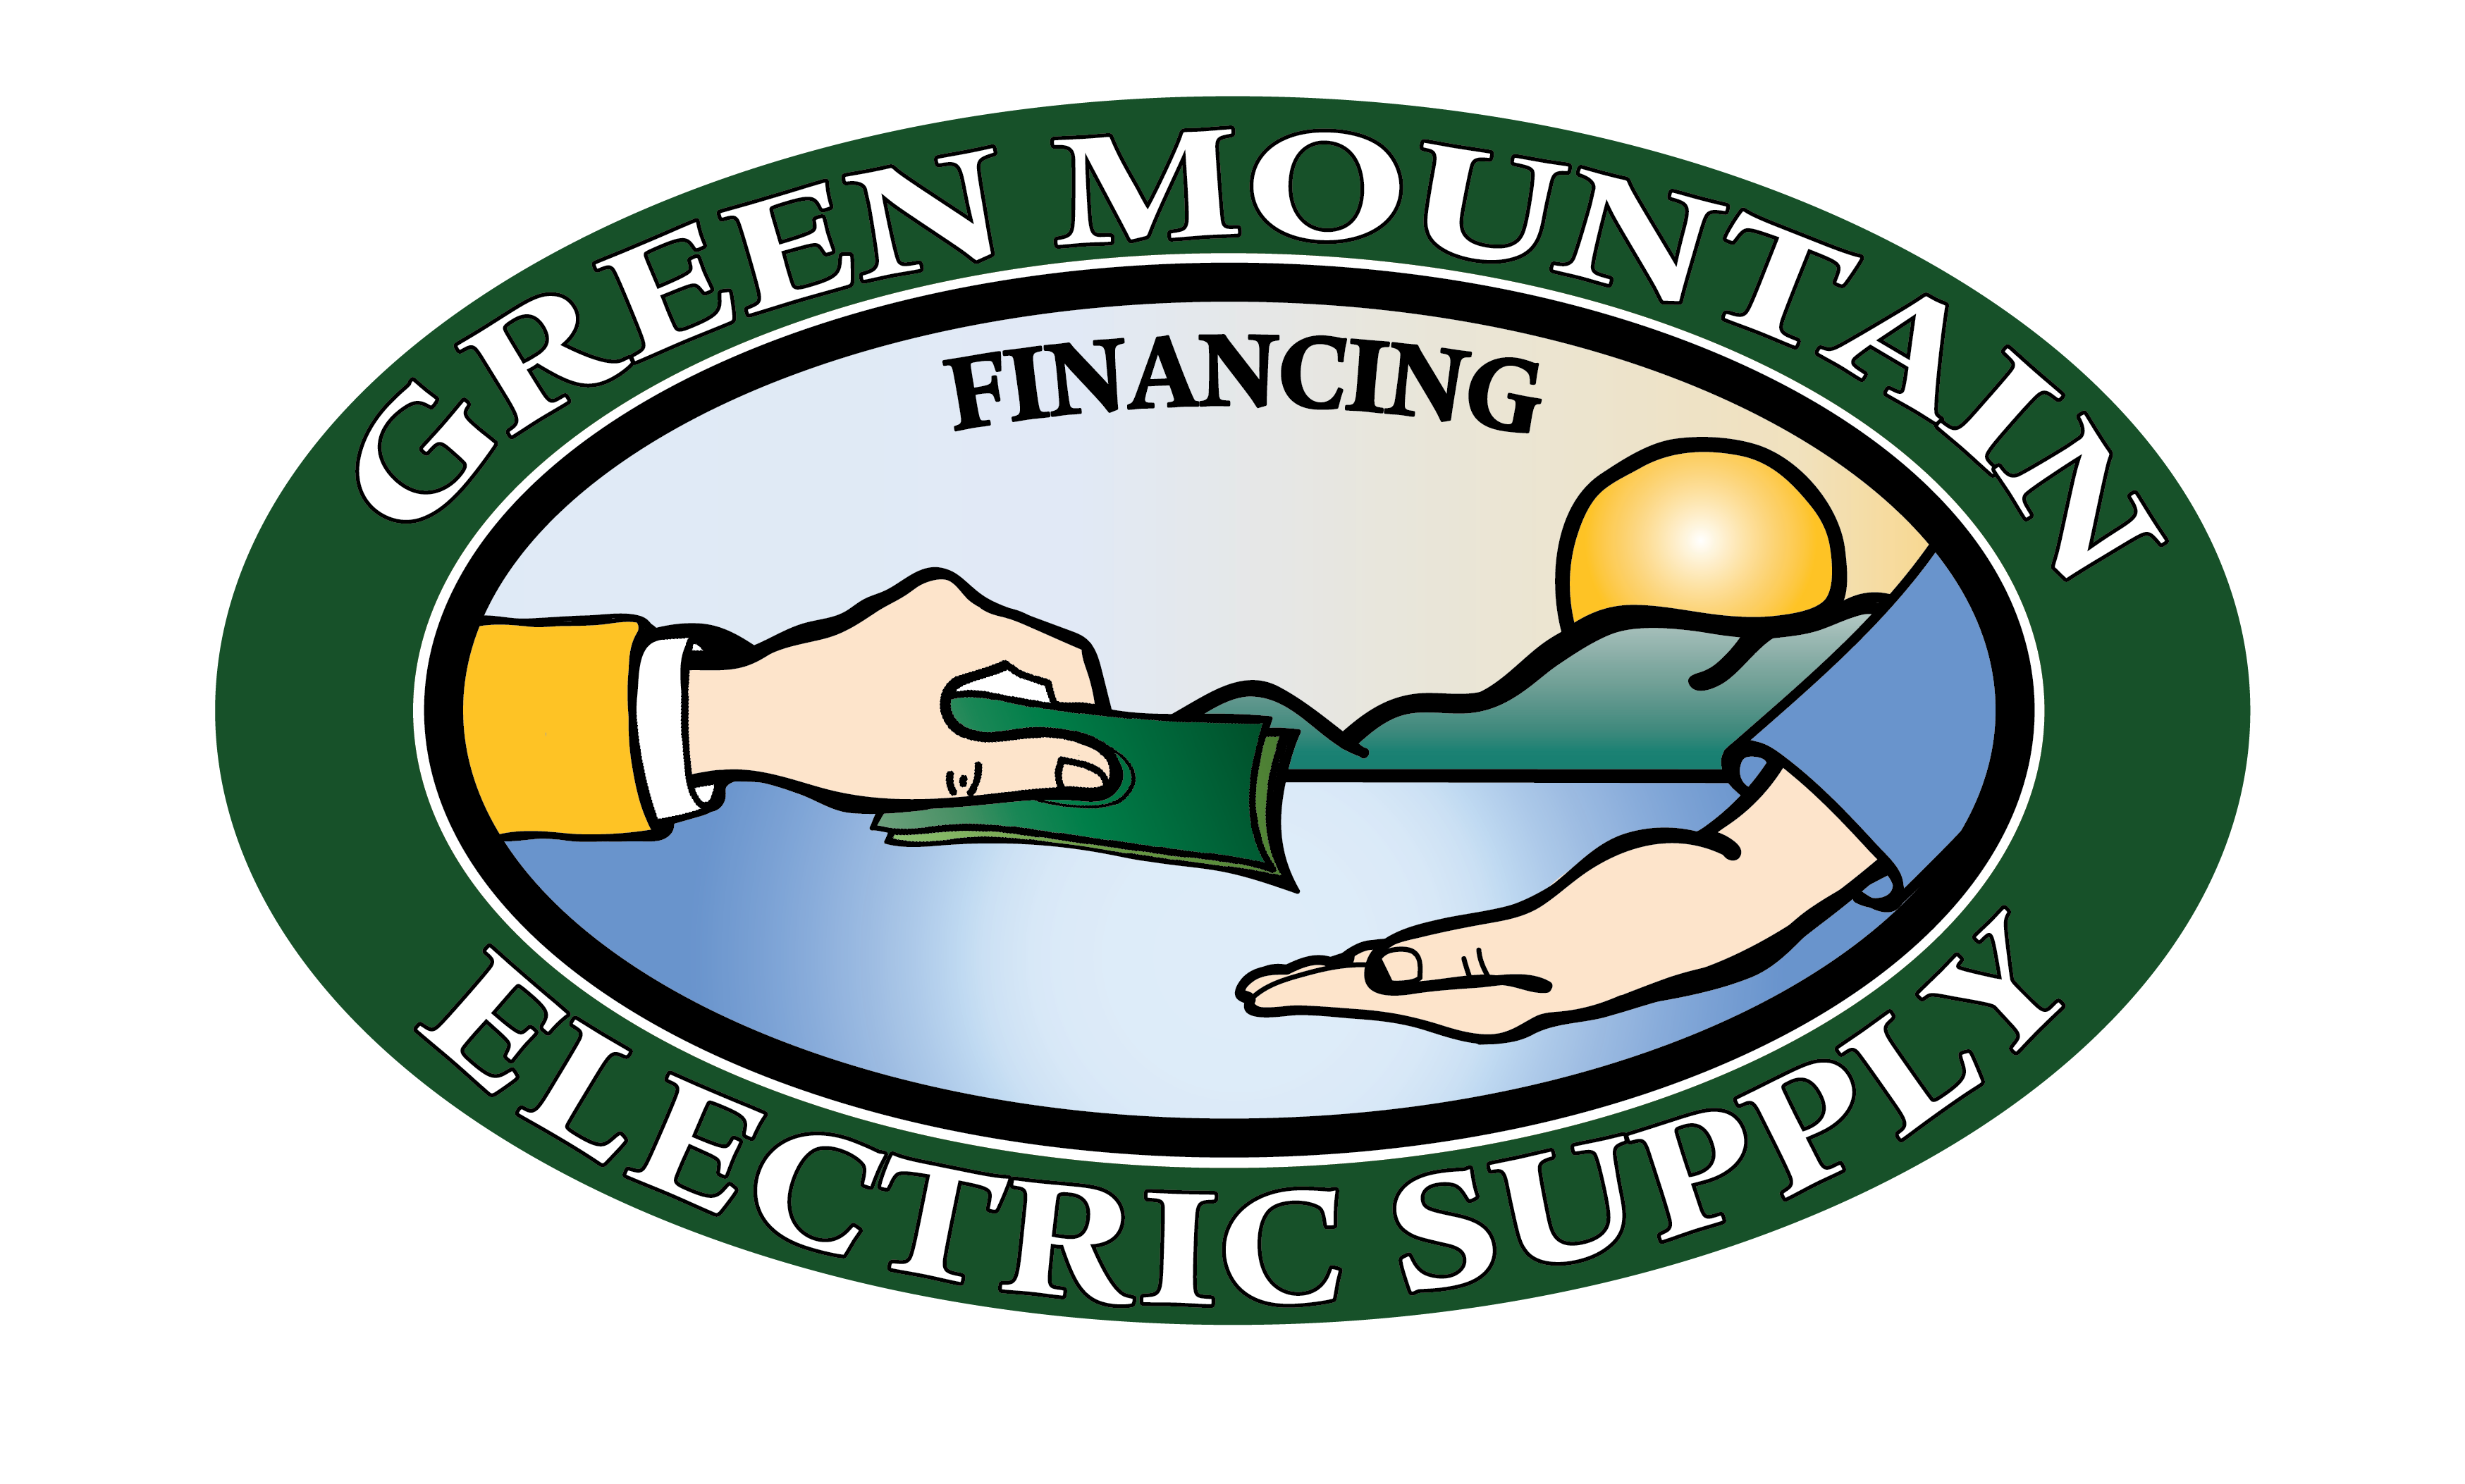 green-mountain-electric-supply-is-excited-to-announce-its-new-financing